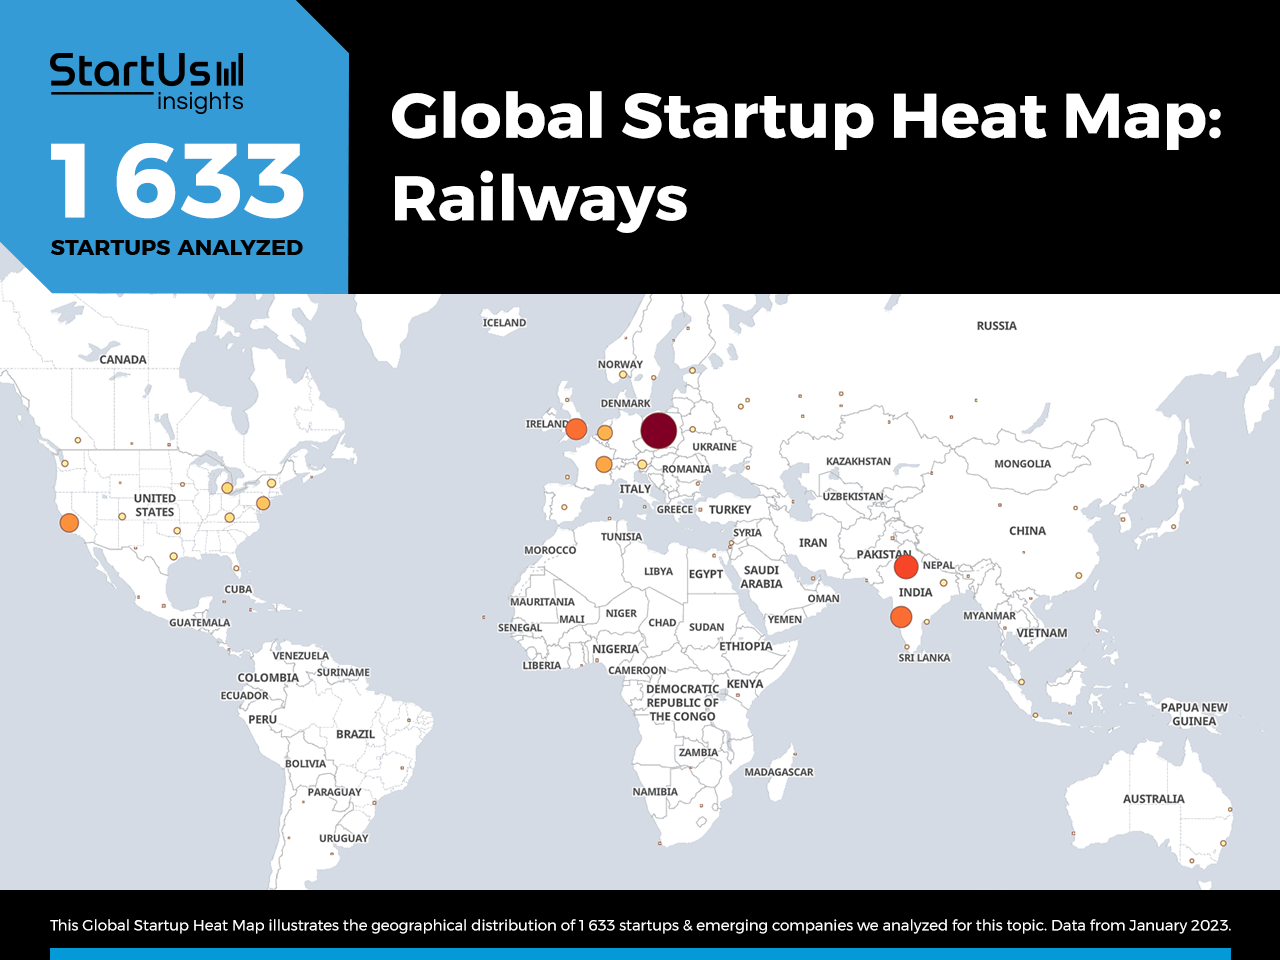 Railways-trends-Startups-TrendResearch-Heat-Map-StartUs-Insights-noresize